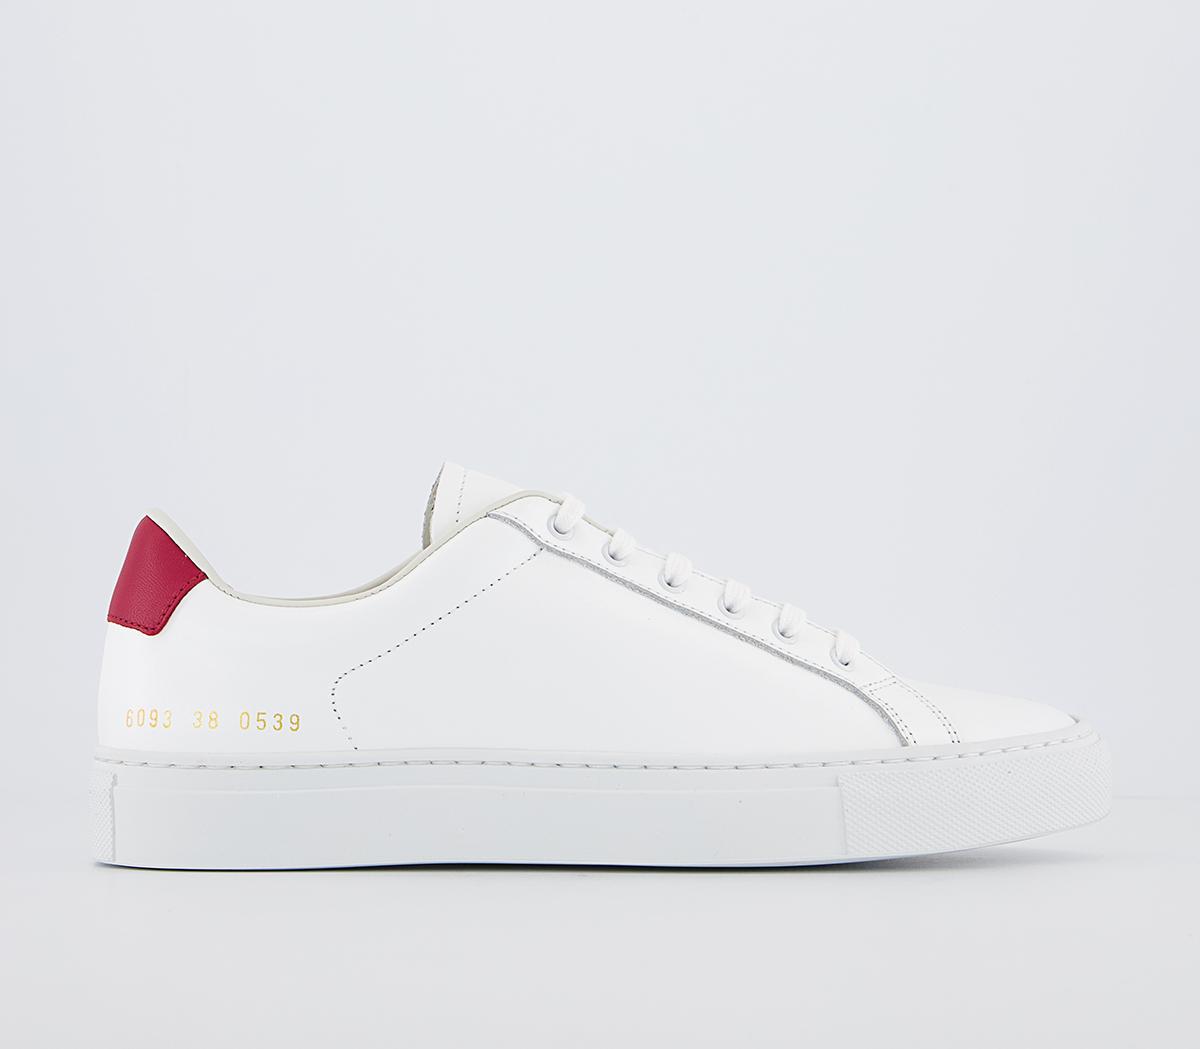 Common ProjectsRetro Low TrainersWhite Red